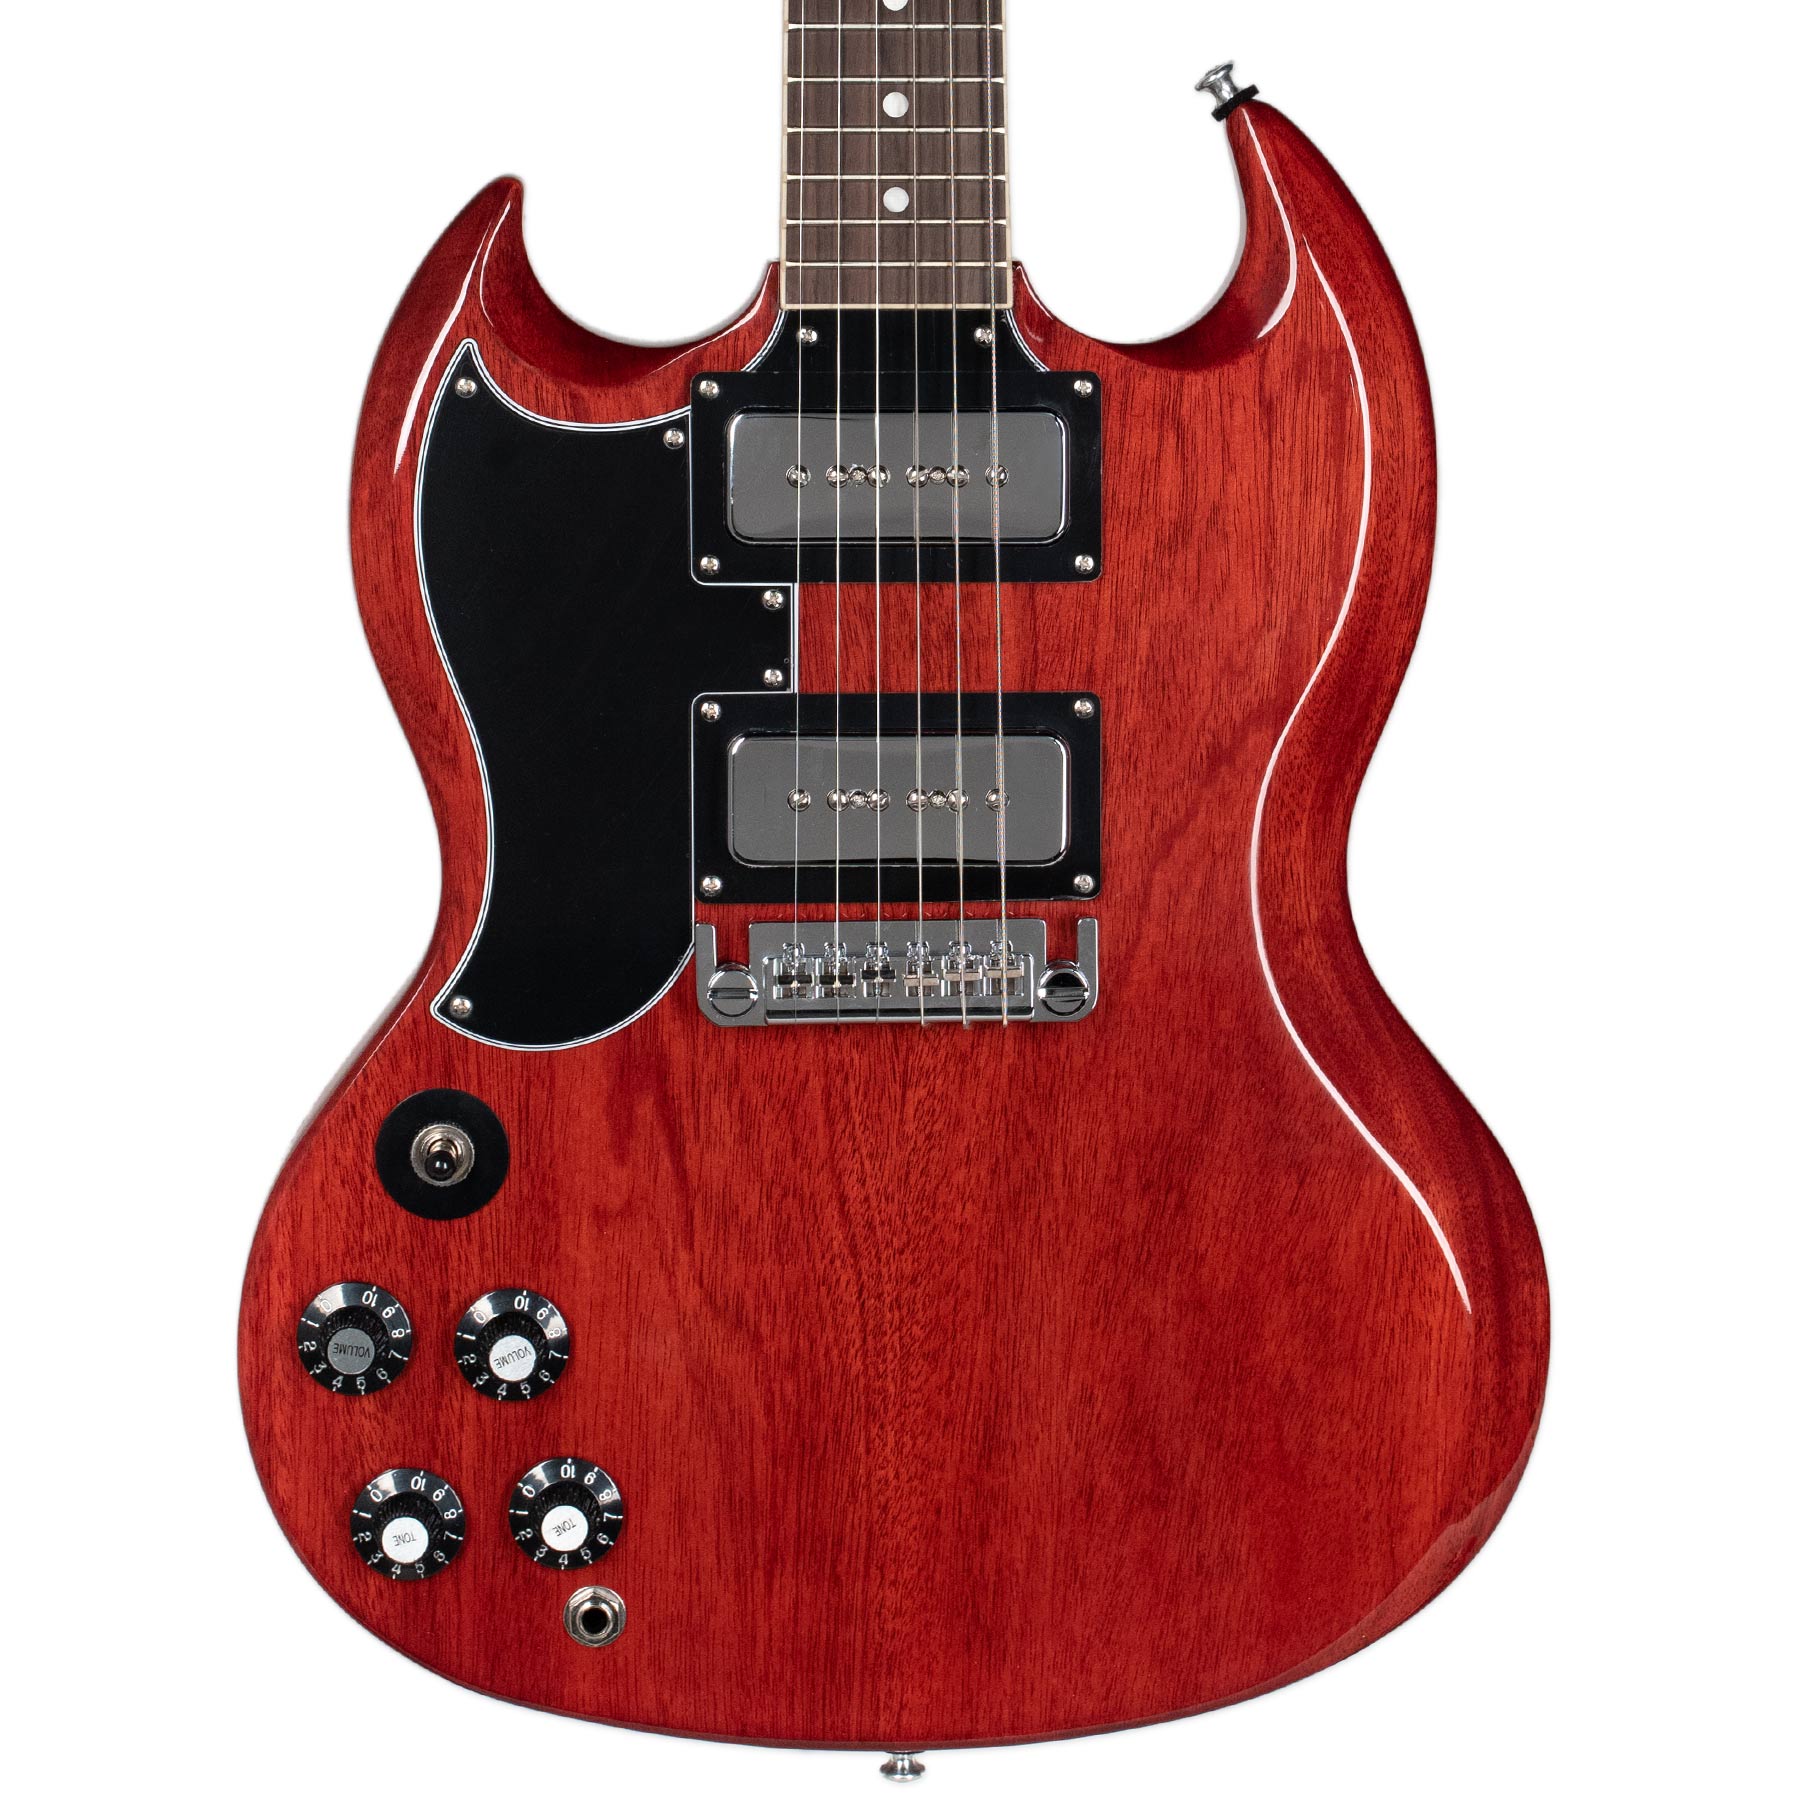 GIBSON TONY IOMMI "MONKEY" SG SPECIAL LEFT-HANDED - VINTAGE RED